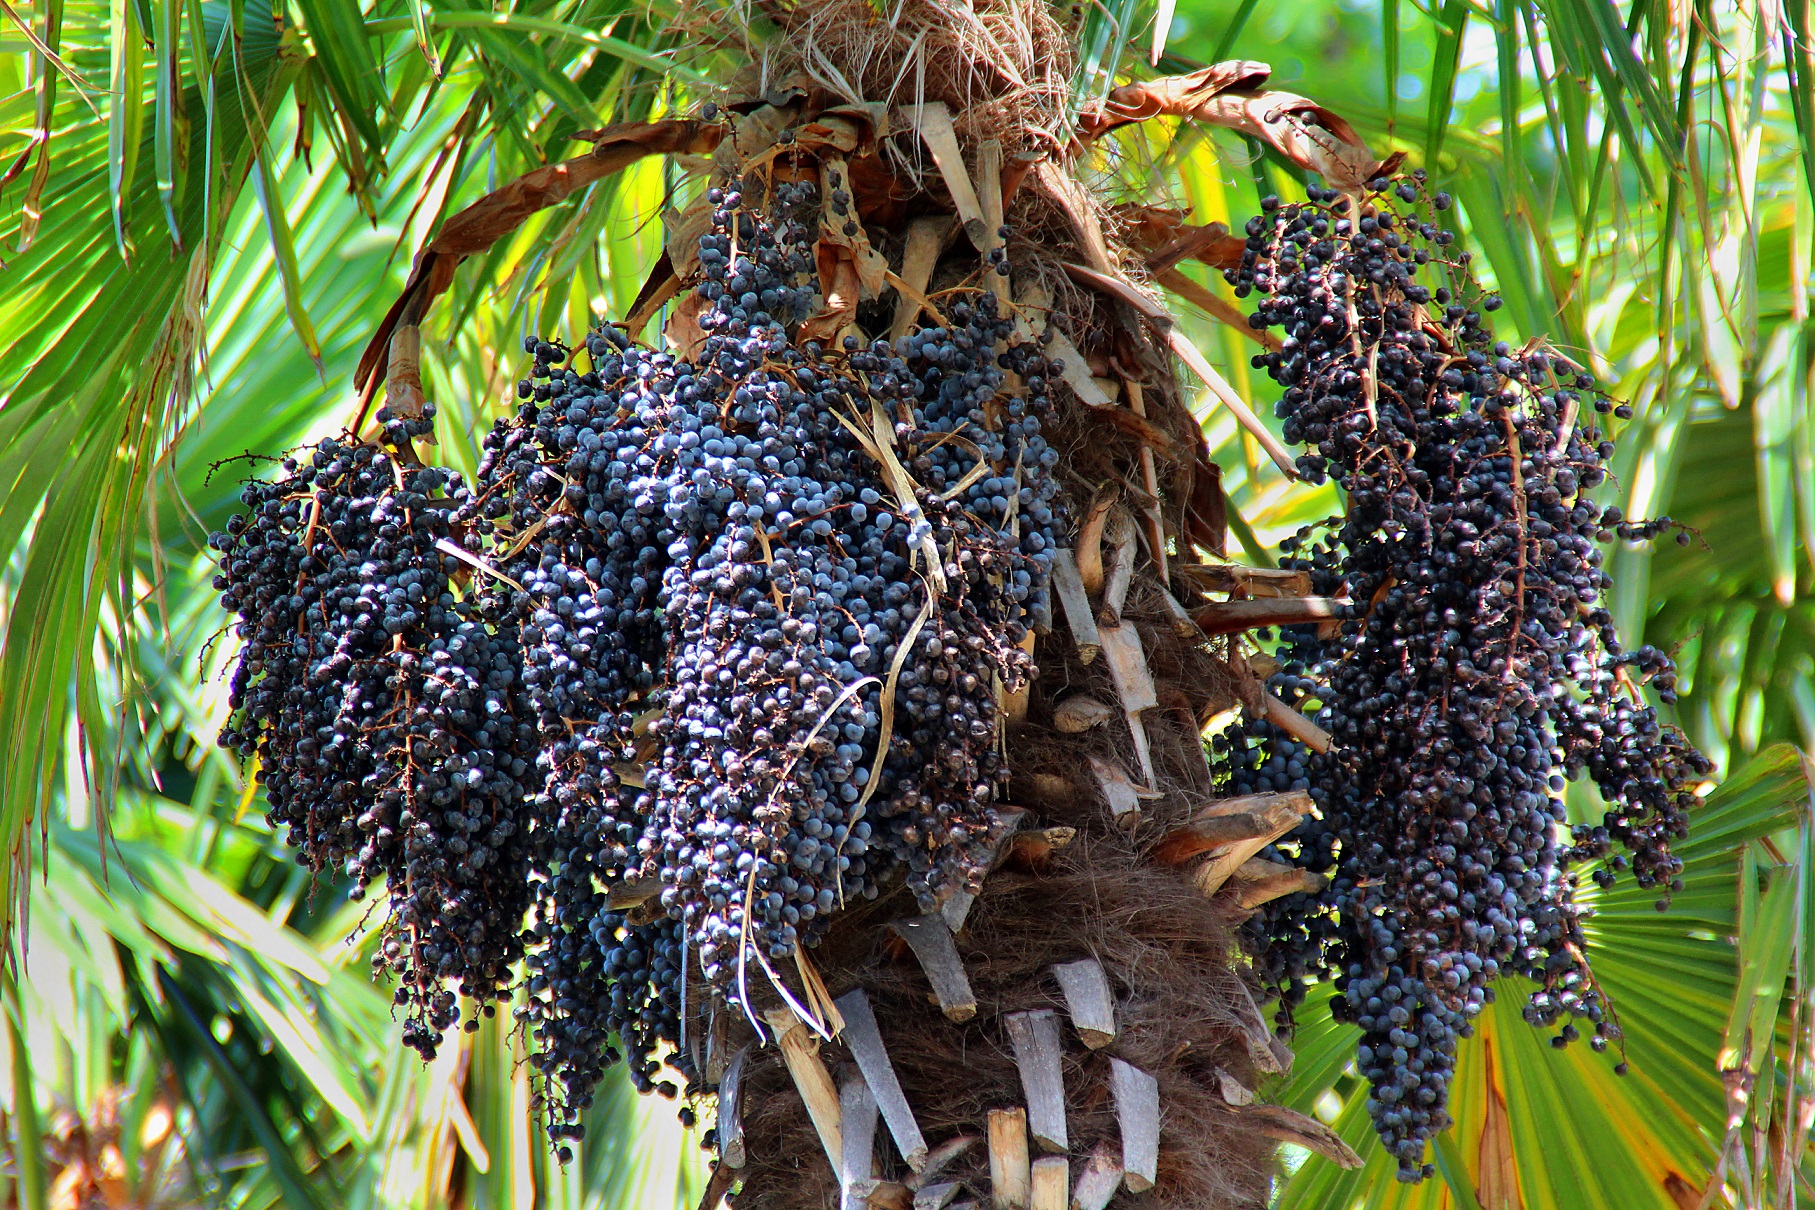 Superfood açaí berry not only protects heart health